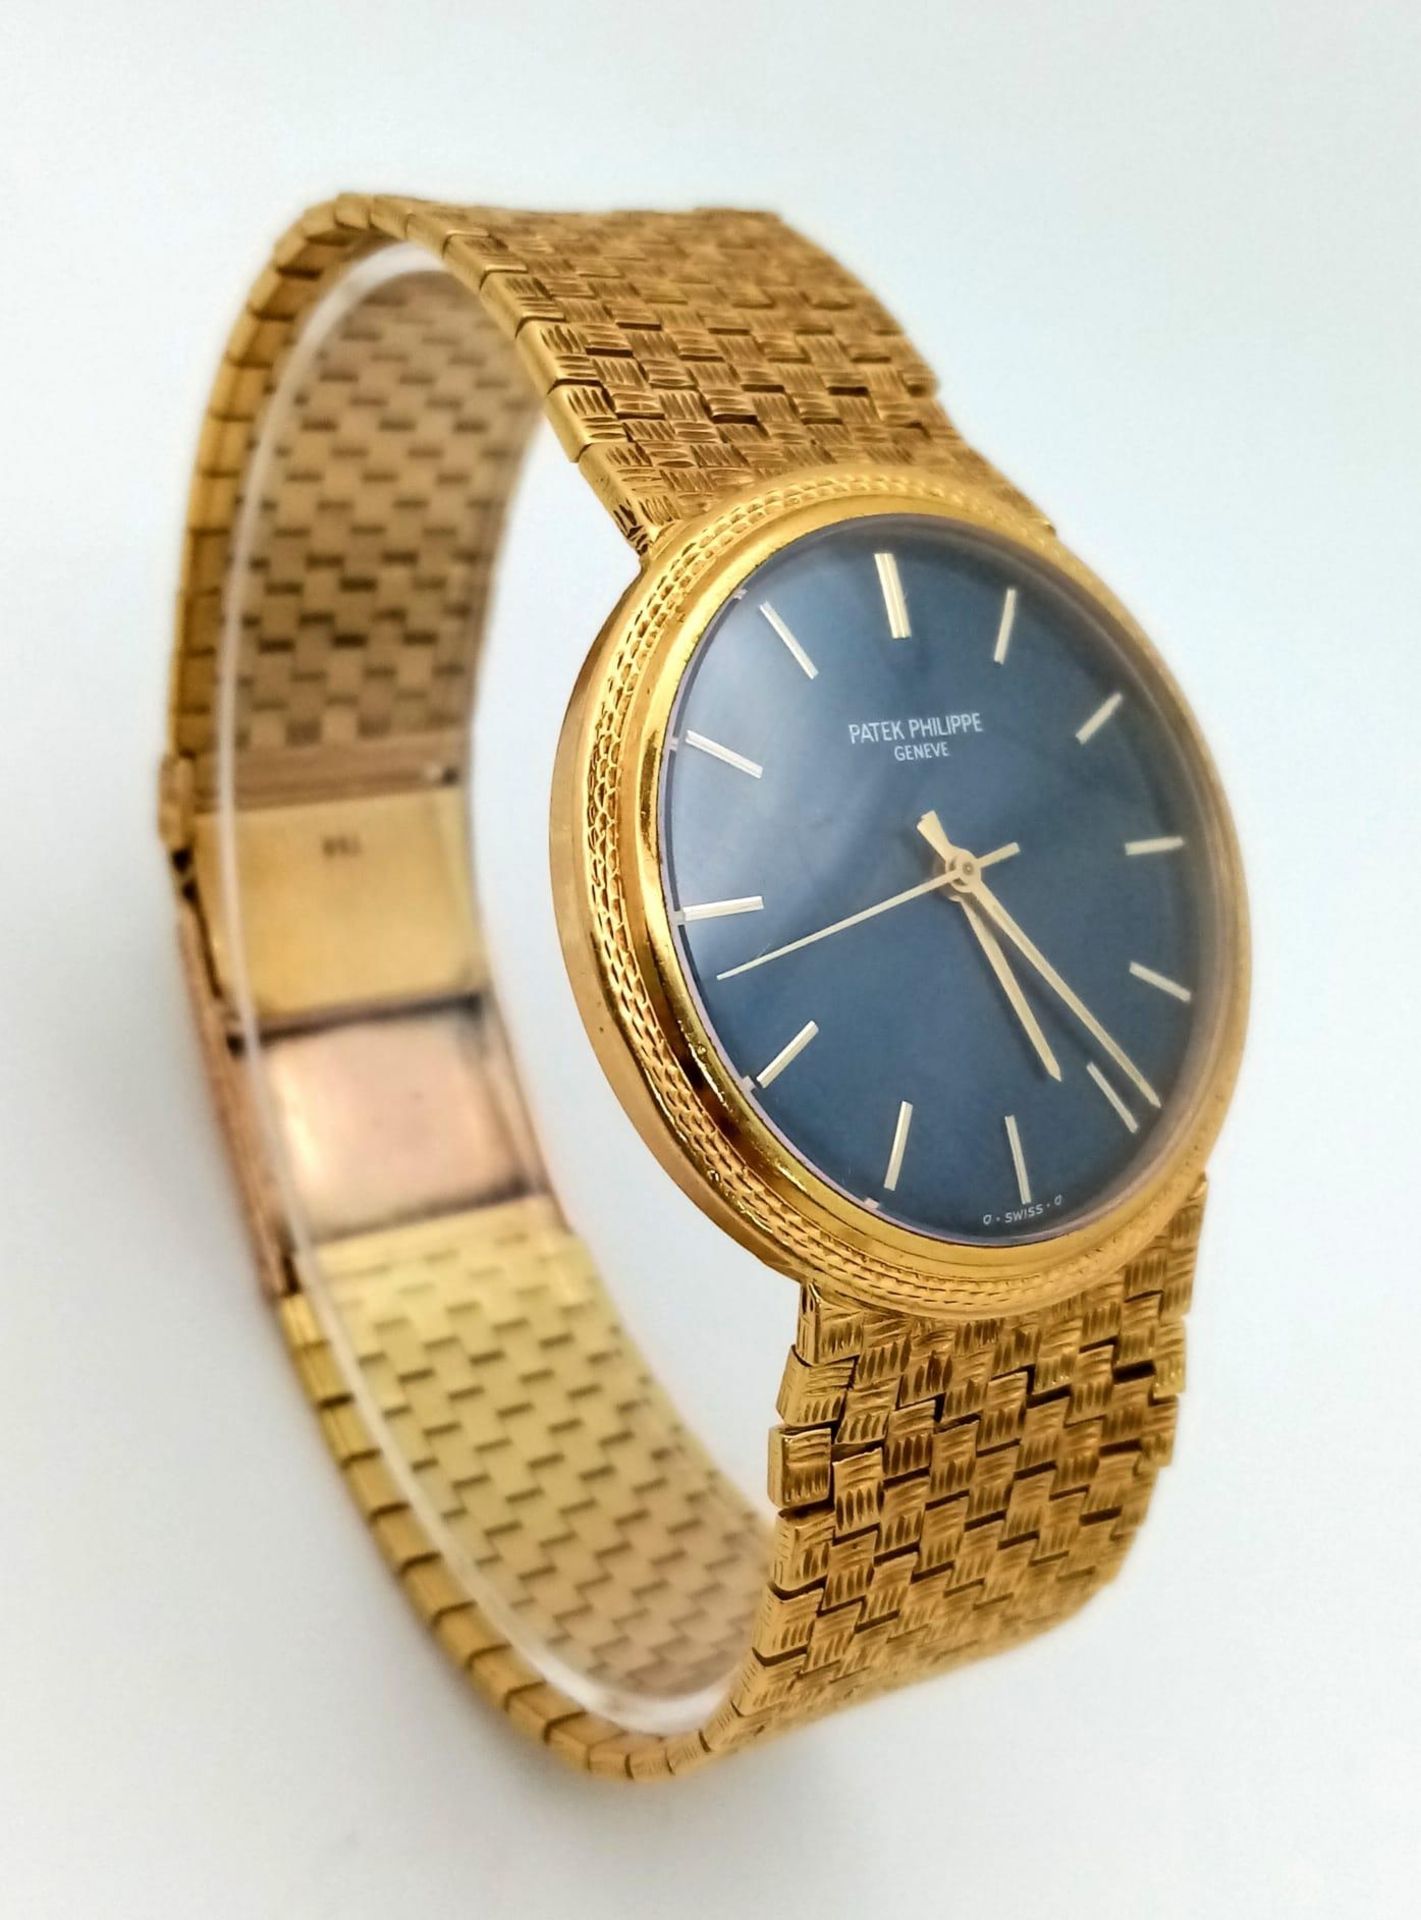 A SHOW STOPPING 18K GOLD PATEK PHILIPPE GENTS WATCH WITH BLOCK LINK SOLID 18K GOLD STRAP, AMAZING - Image 3 of 8